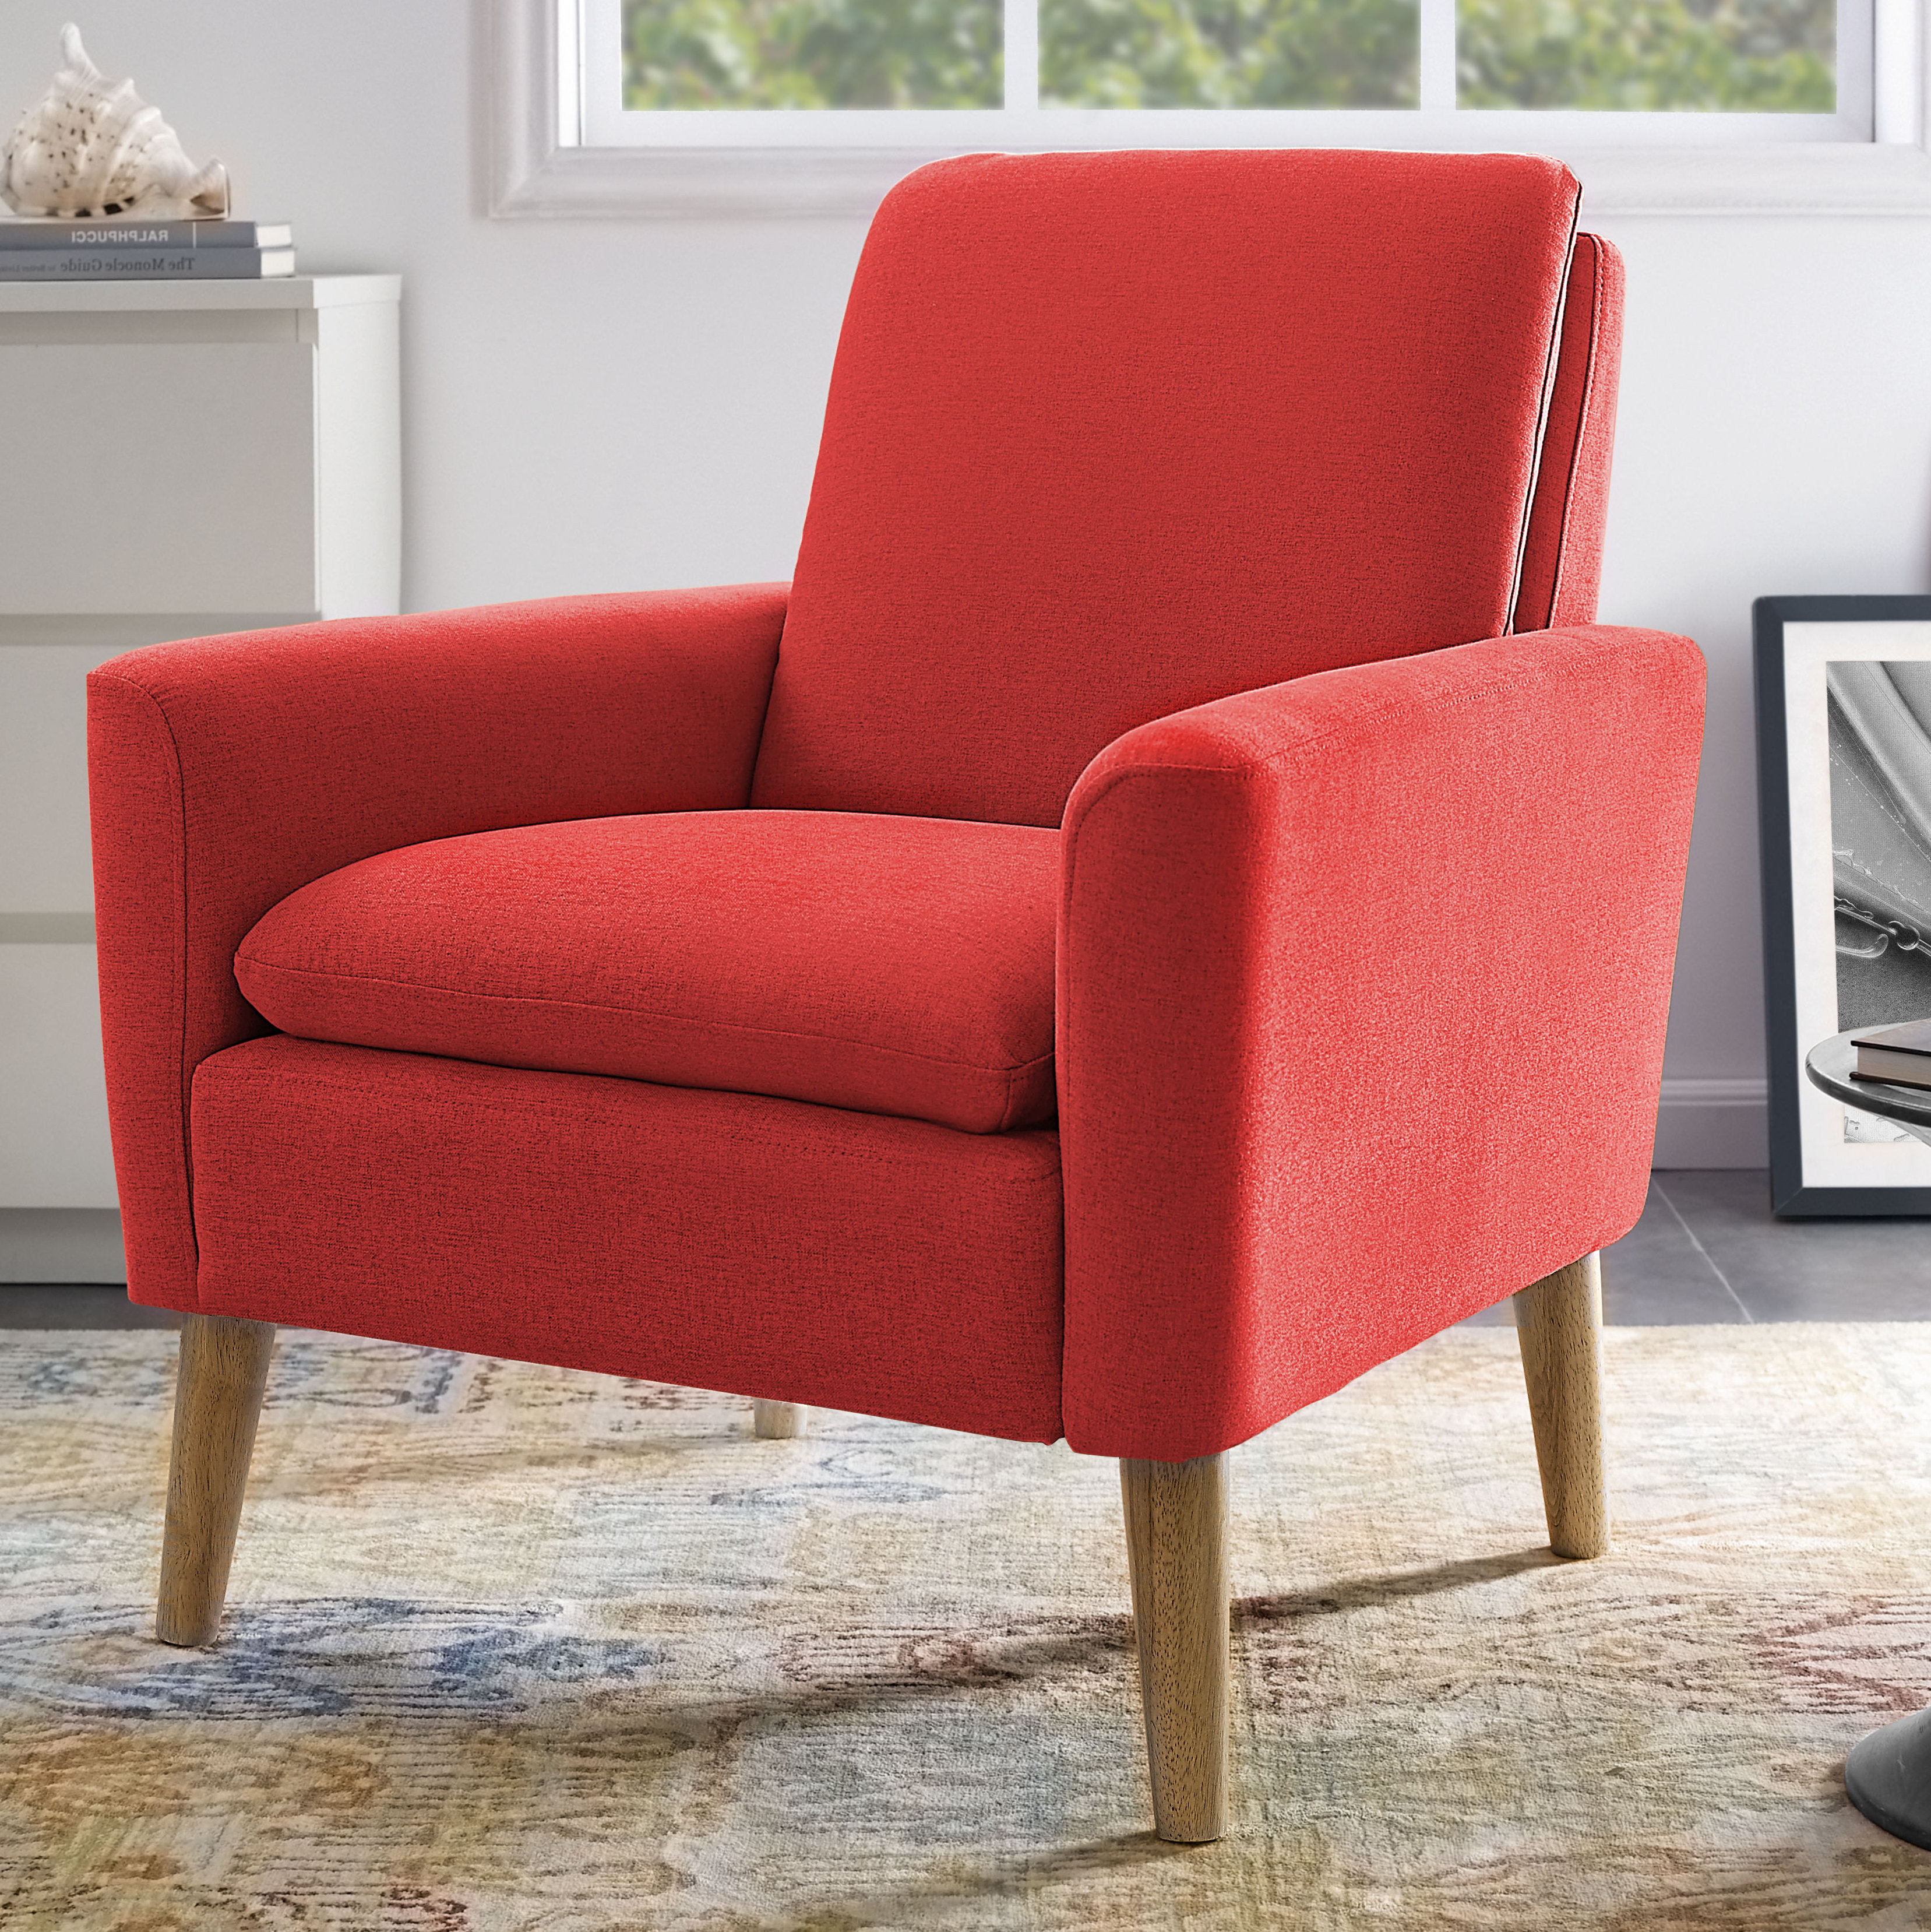 20 Best Cane Accent Chairs You'll Love - Candie Anderson